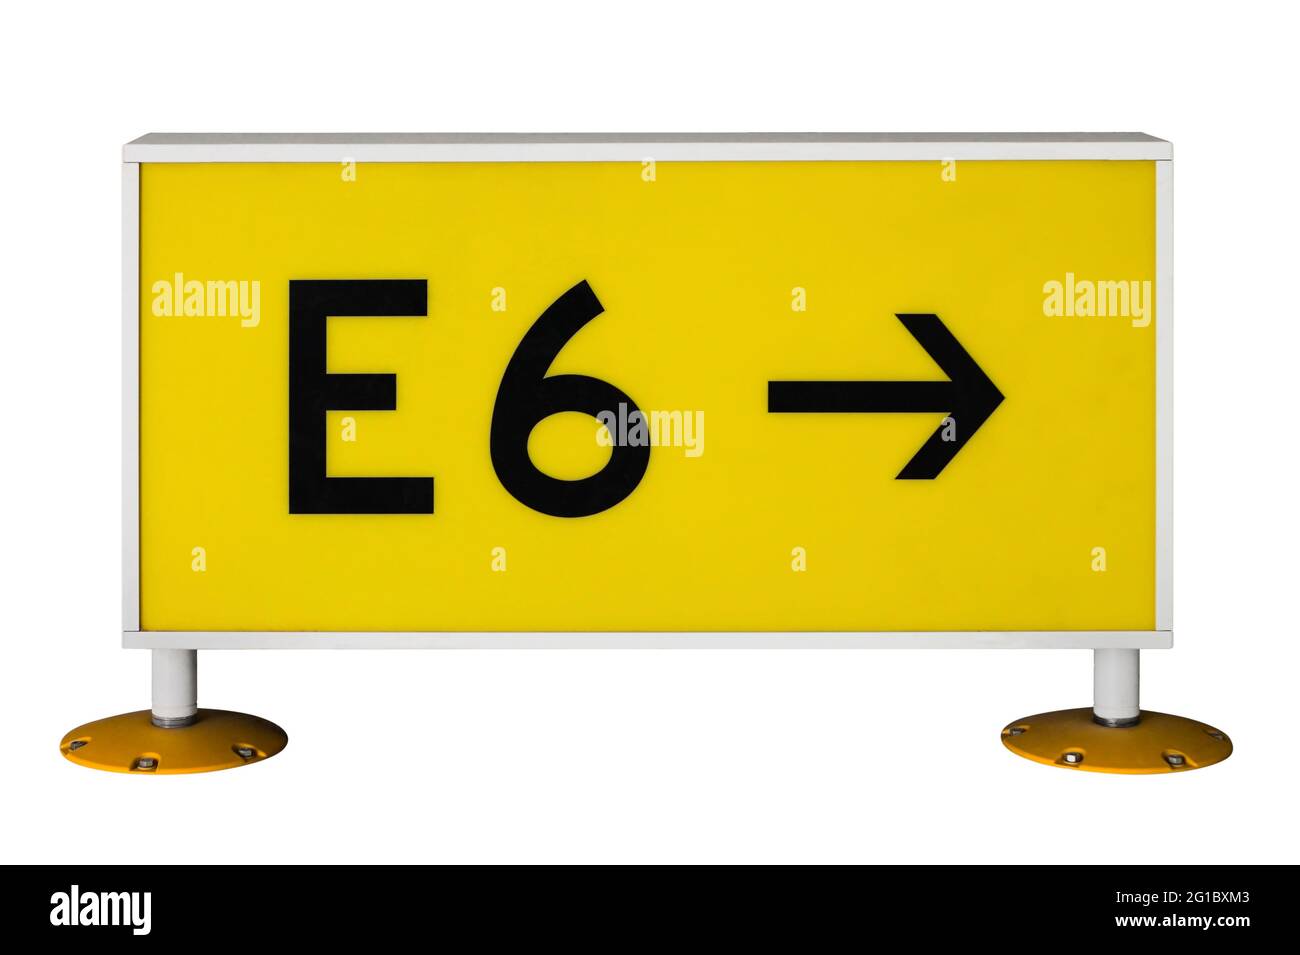 Taxiway sign to runway guidance marker terminal signal Stock Photo